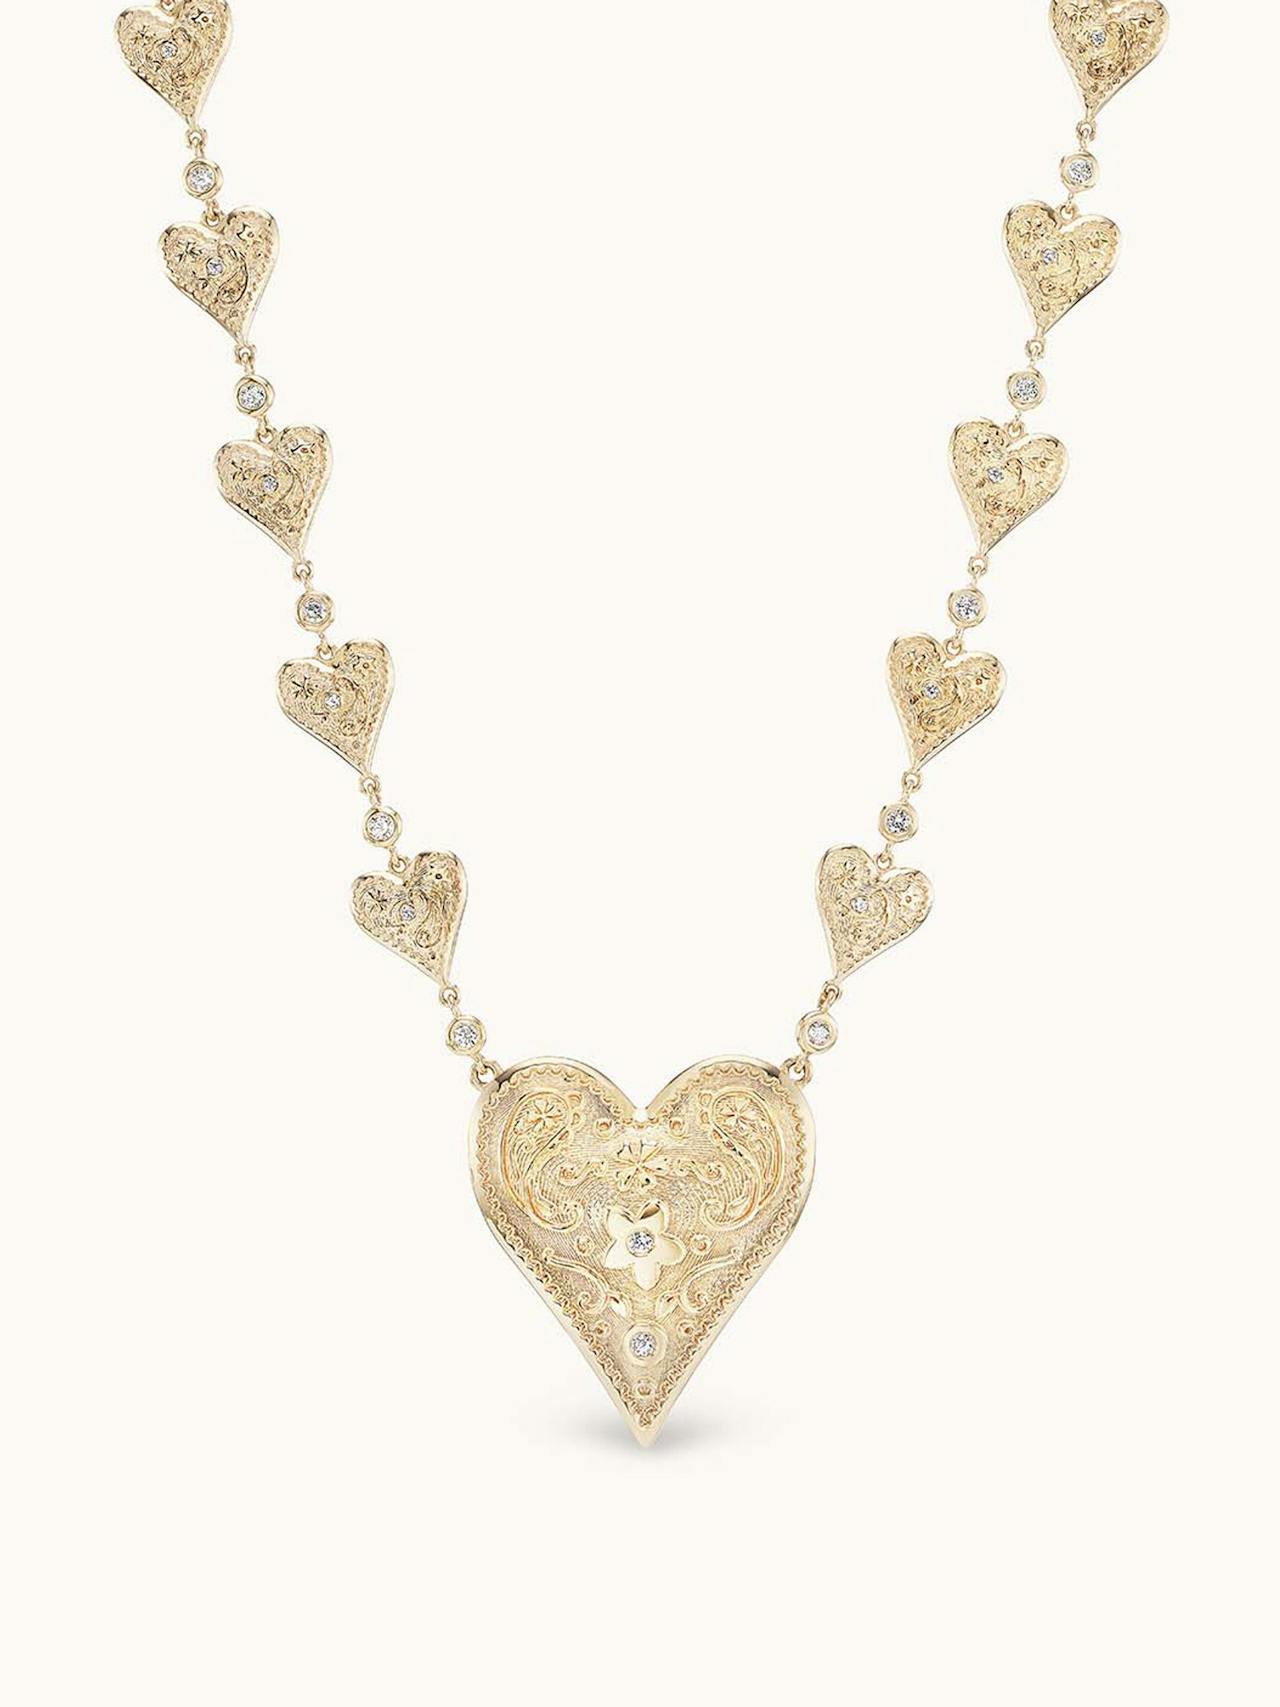 Southwestern mixed heart chain necklace